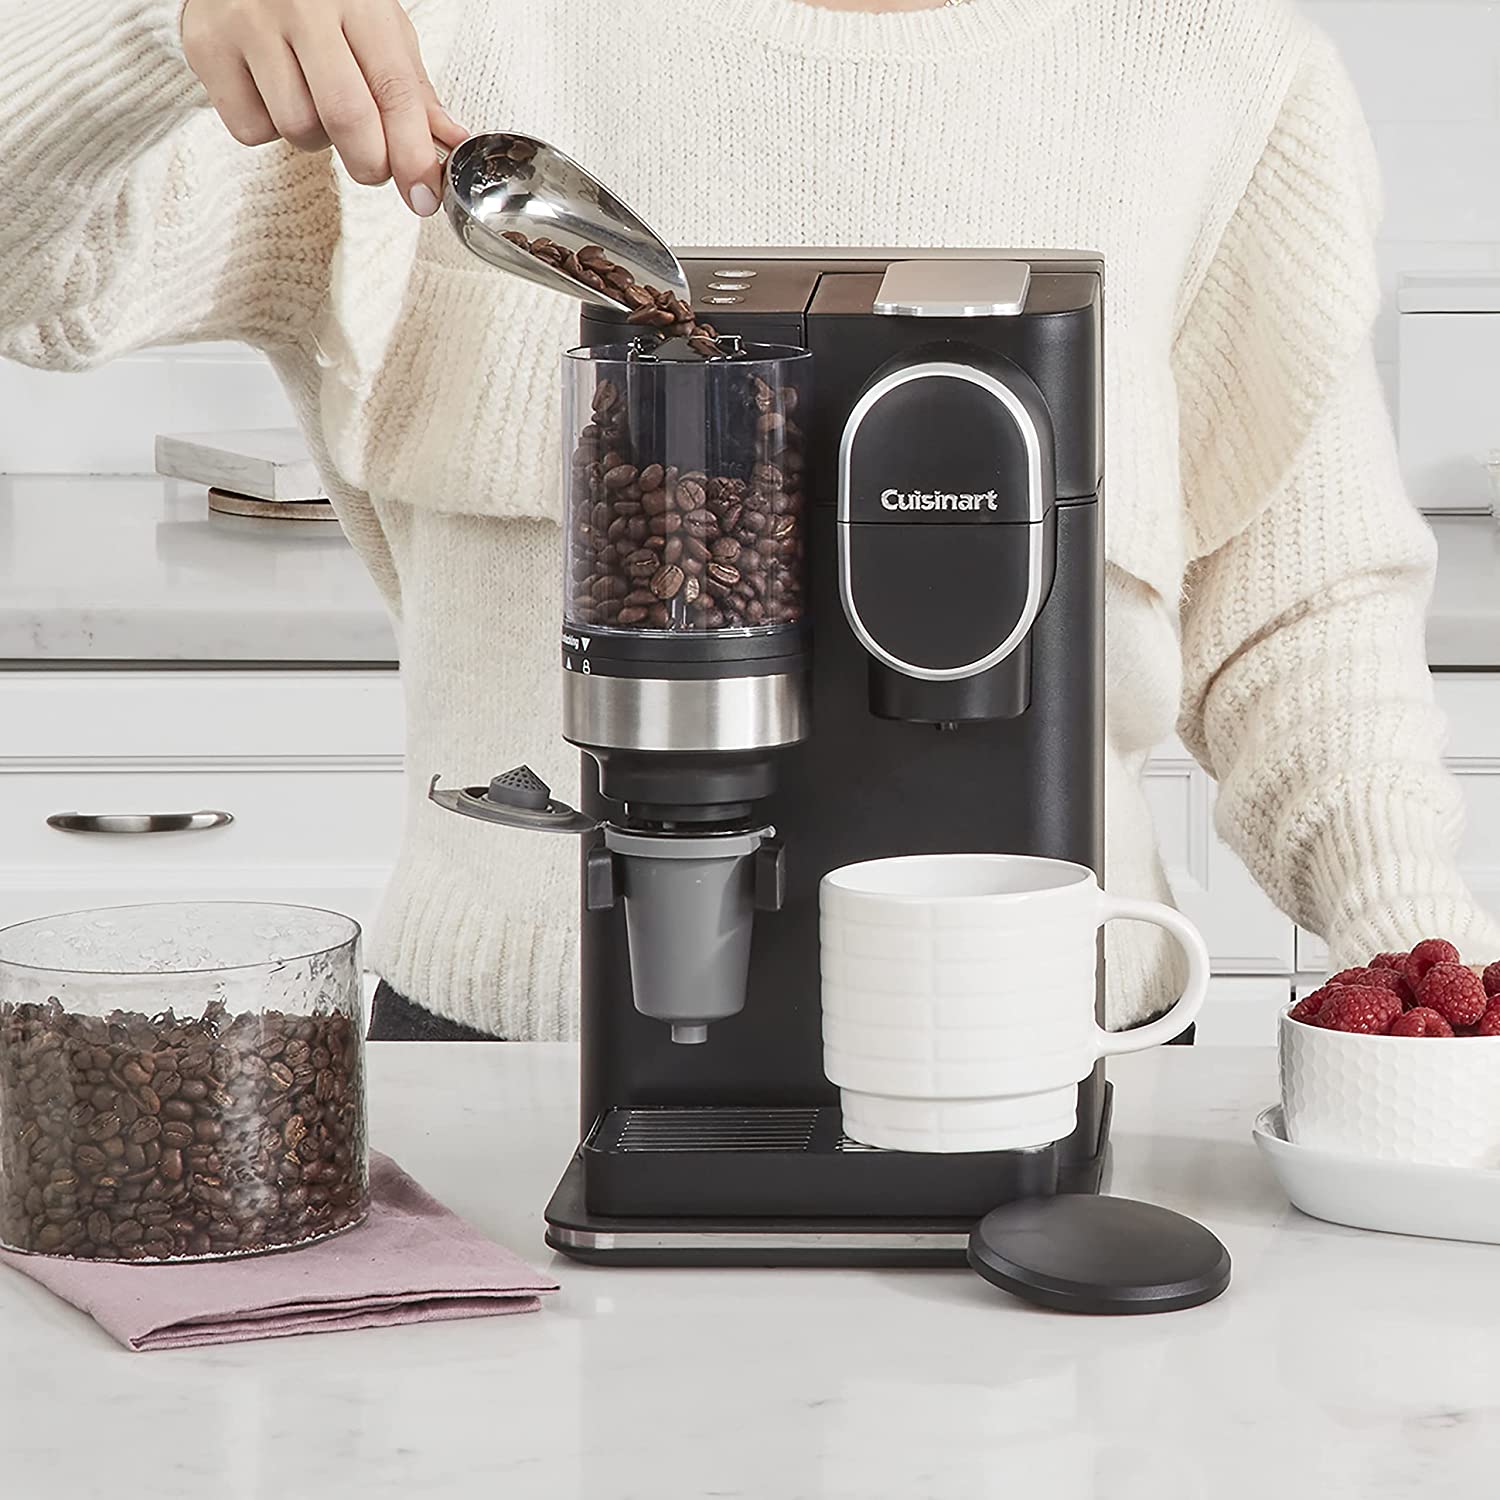 Cuisinart Grind & Brew Single Serve Coffeemaker Review: Small